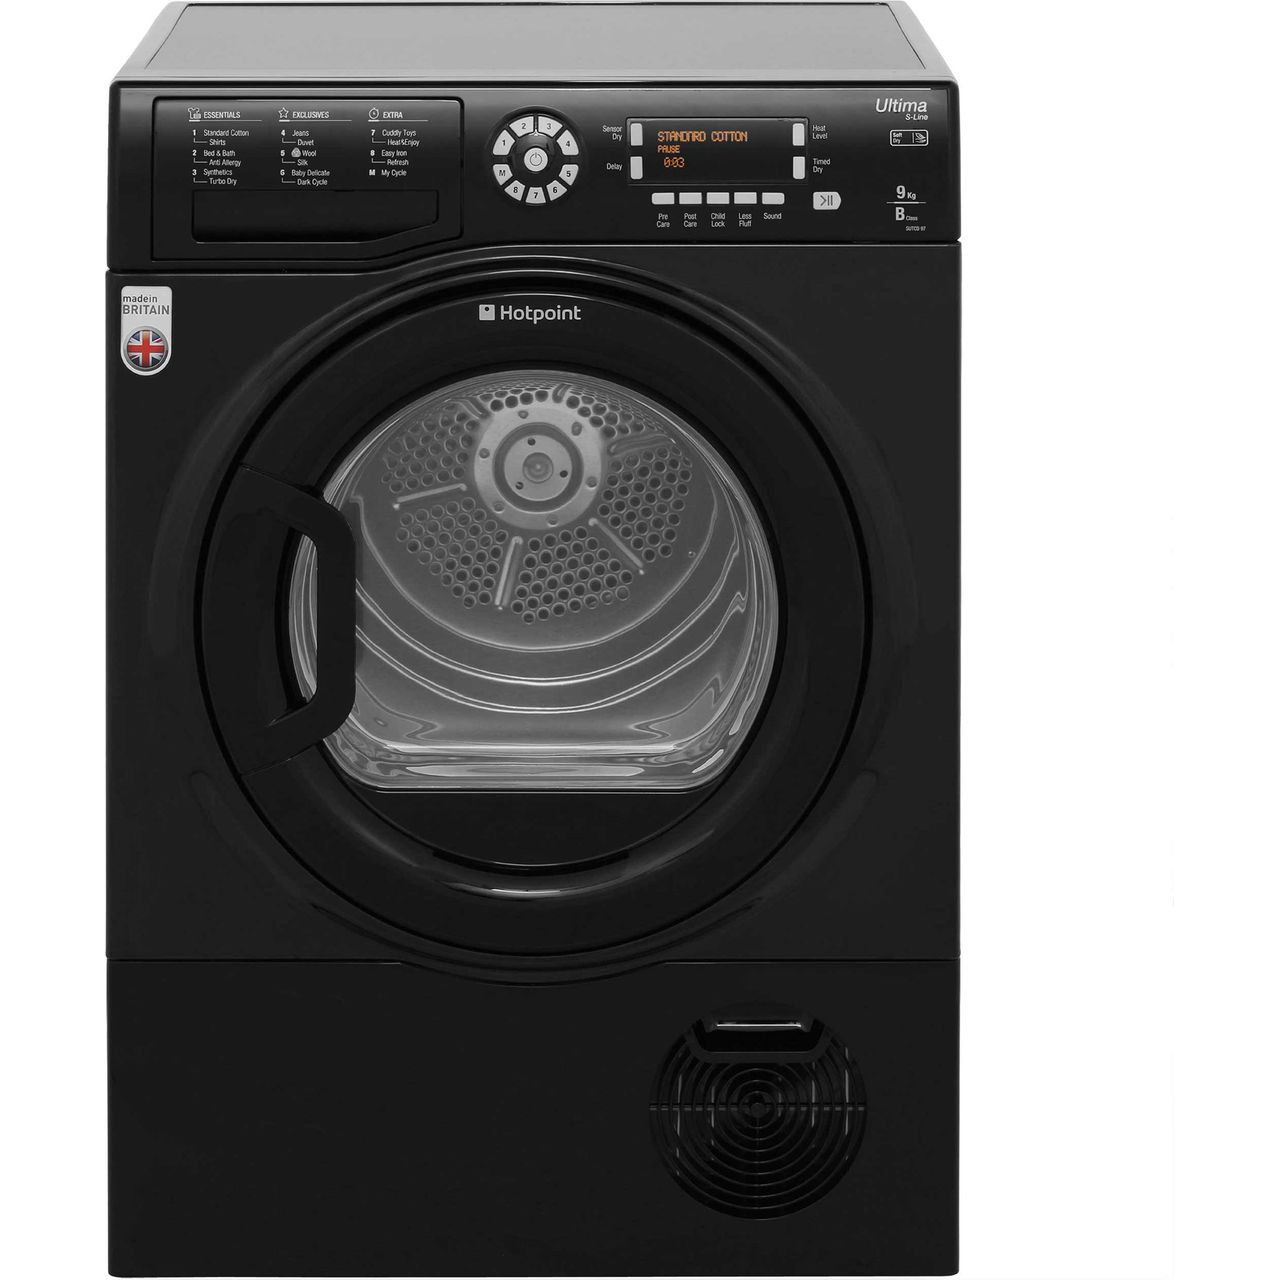 Hotpoint Ultima S-Line SUTCD97B6KM 9Kg Condenser Tumble Dryer Review